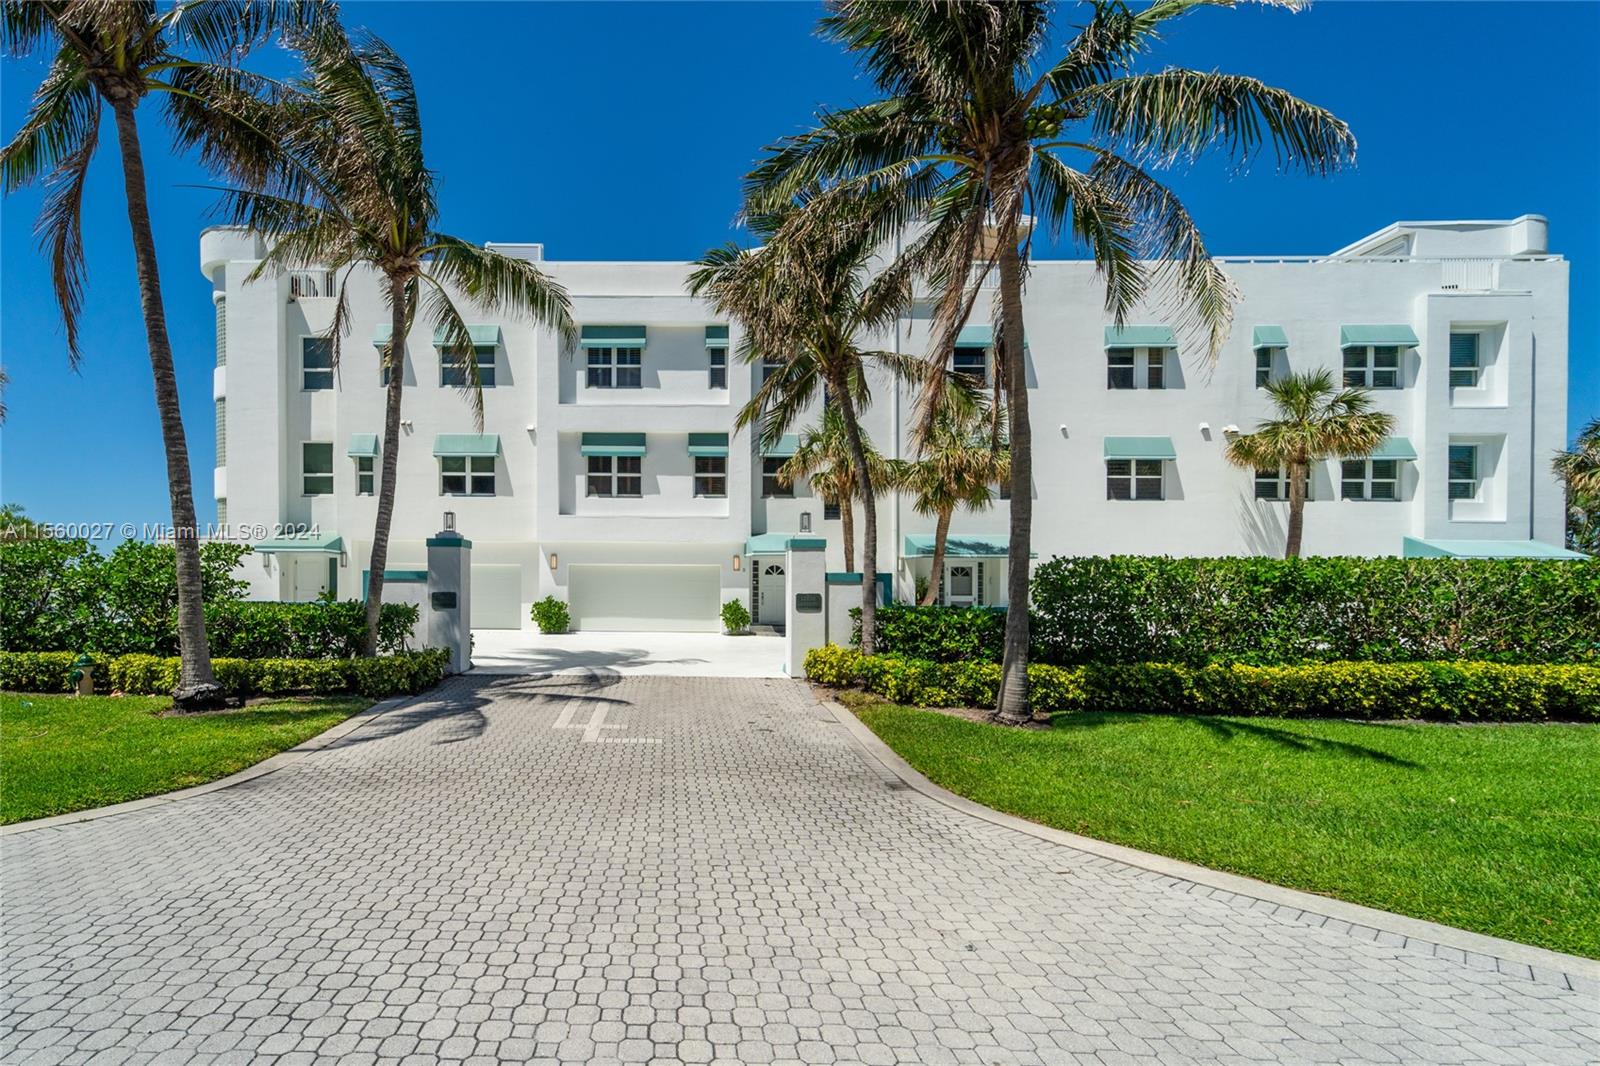 Property for Sale at 19669 Beach Rd Rd B, Jupiter, Palm Beach County, Florida - Bedrooms: 4 
Bathrooms: 4  - $3,495,000